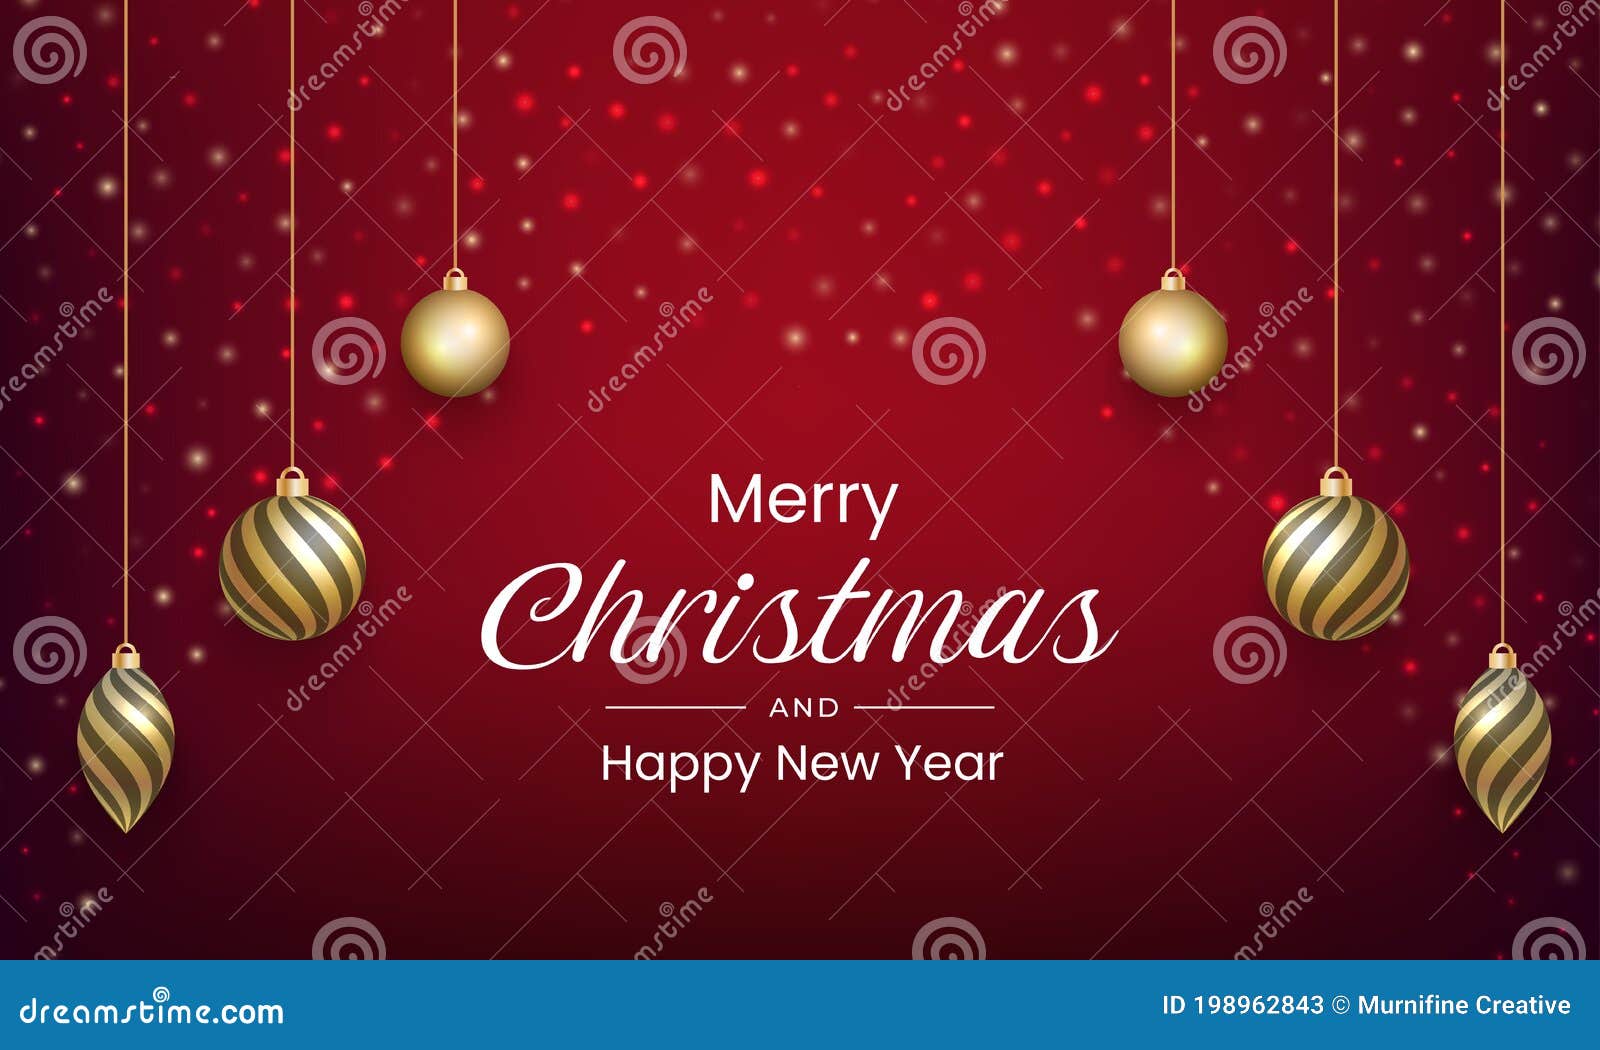 Merry Christmas and New Year Design with Gold Ball Ornament Stock ...